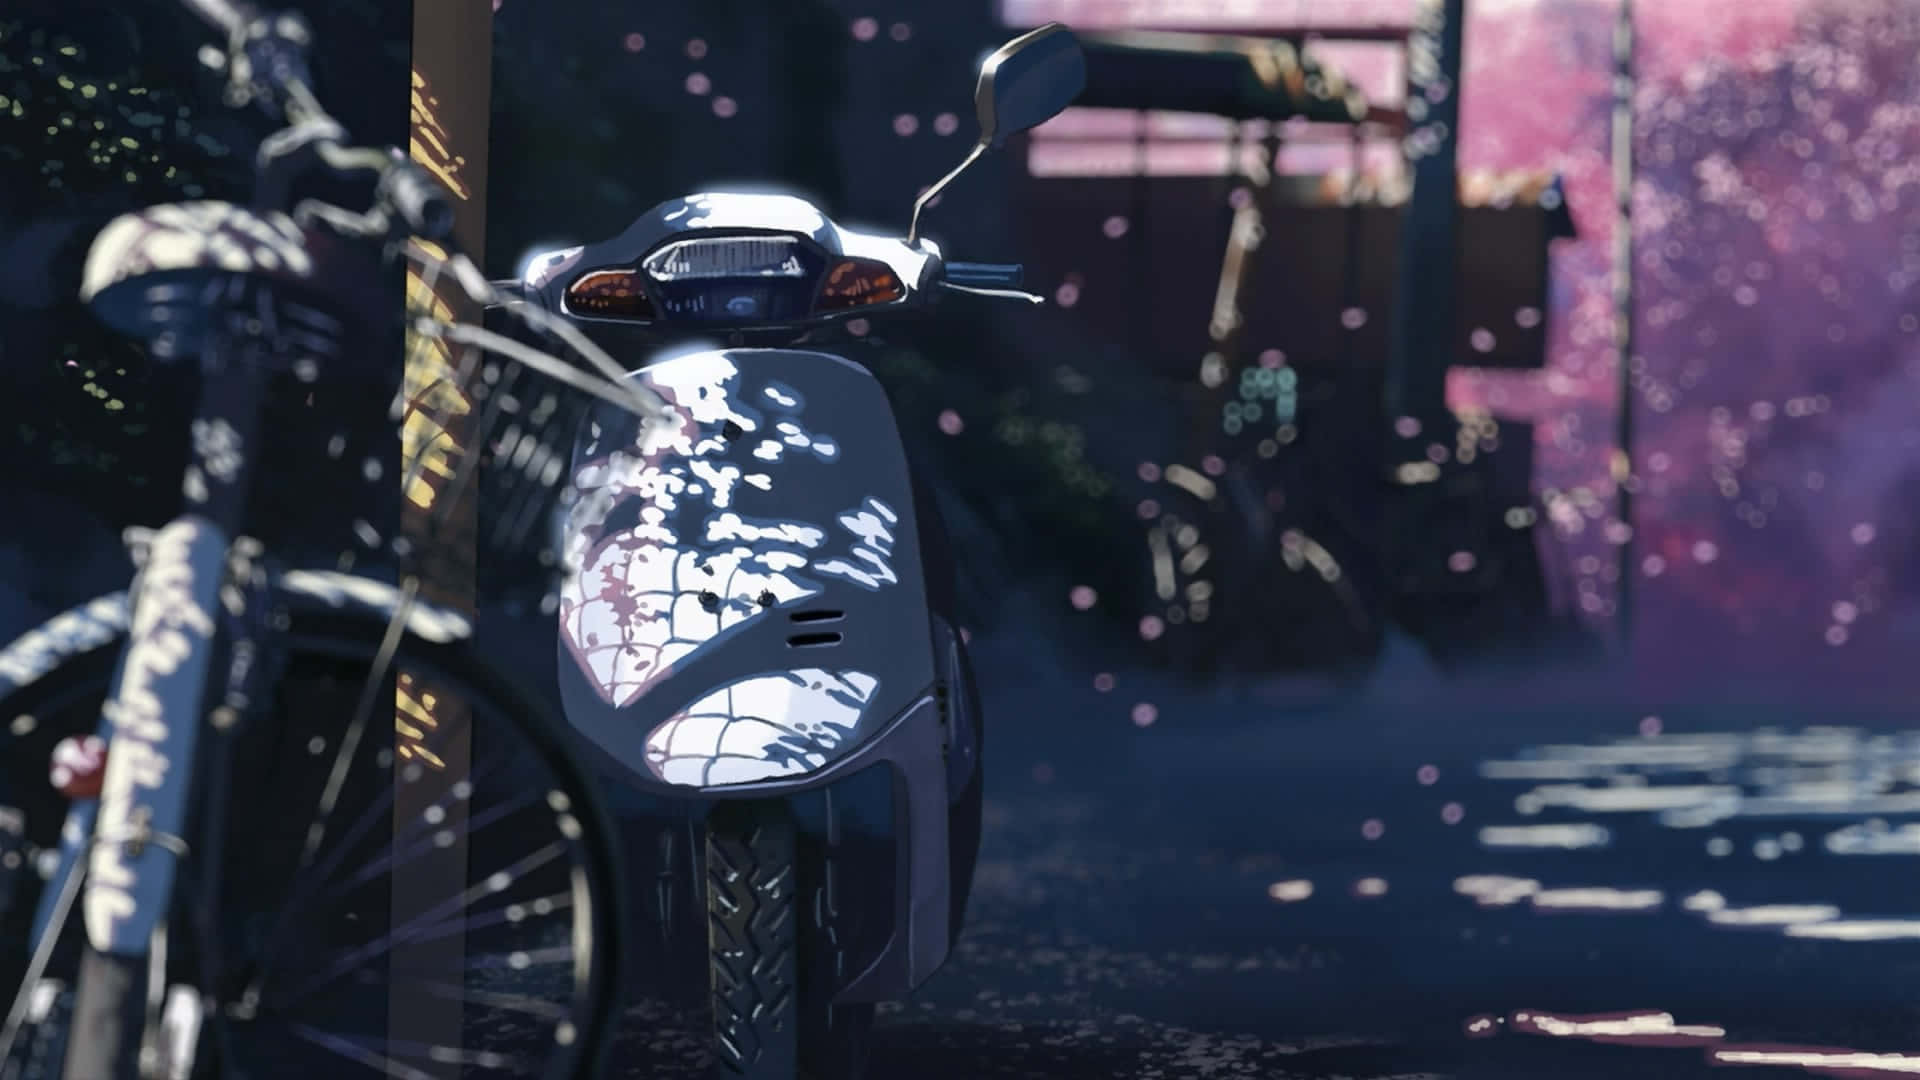 Subtle Anime Motorbike And Bicycle Scene Wallpaper